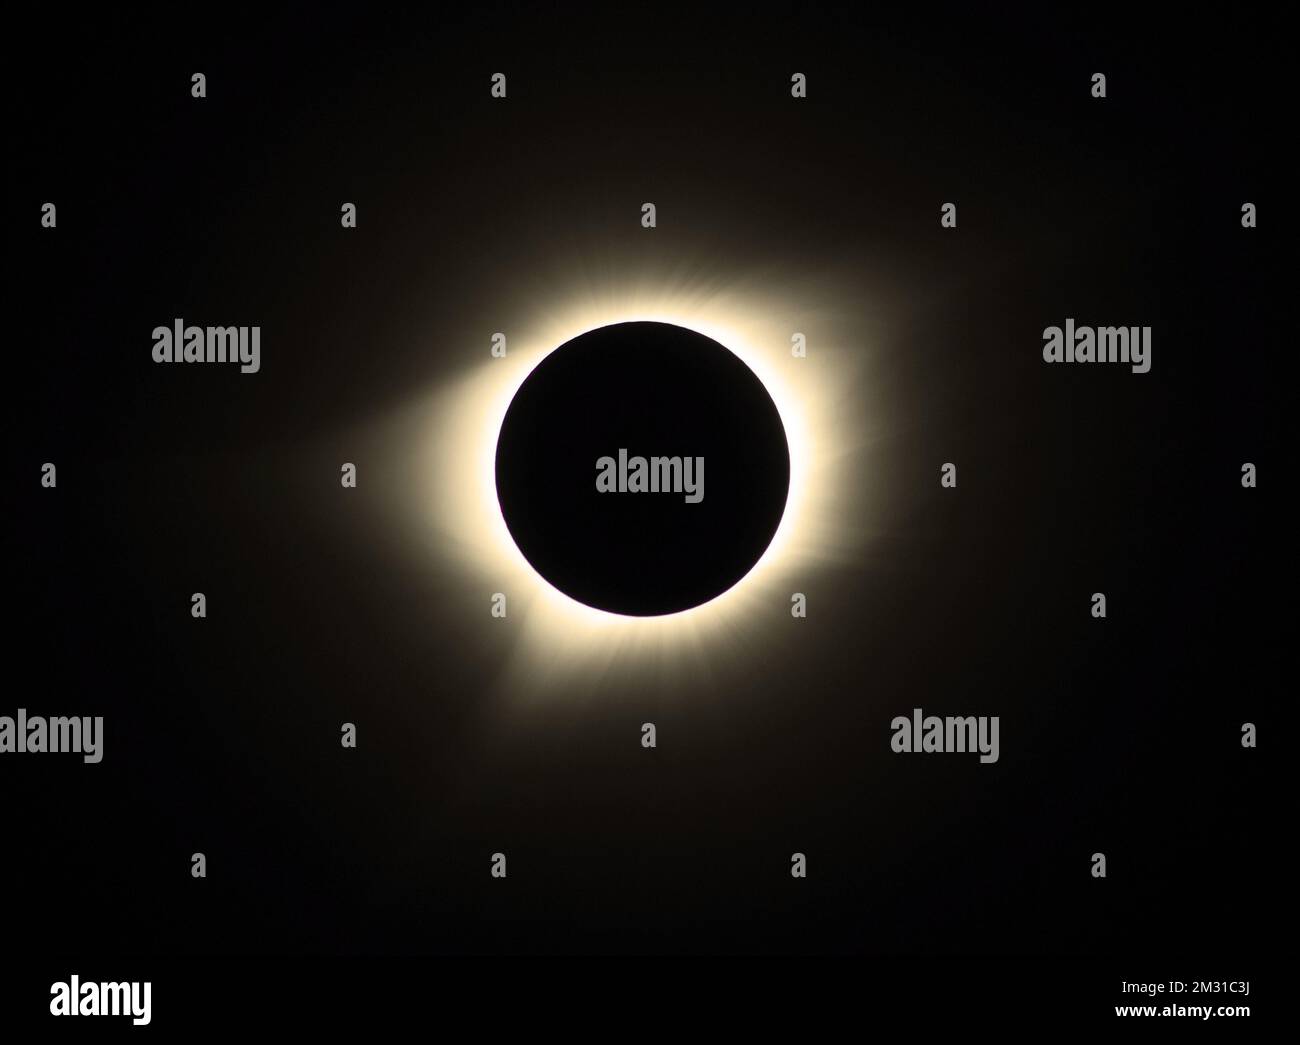 Solar eclipse of 21 August 2017. The corona, a region of the Sun only seen from Earth when the Moon blocks out the Sun's bright face during total solar eclipses. The corona holds the answers to many of scientists' outstanding questions about the Sun's activity and processes. This photo was taken during the total solar eclipse on Aug. 21, 2017 from Oregon, USA  Credit: NASA/Golpalswamy Stock Photo